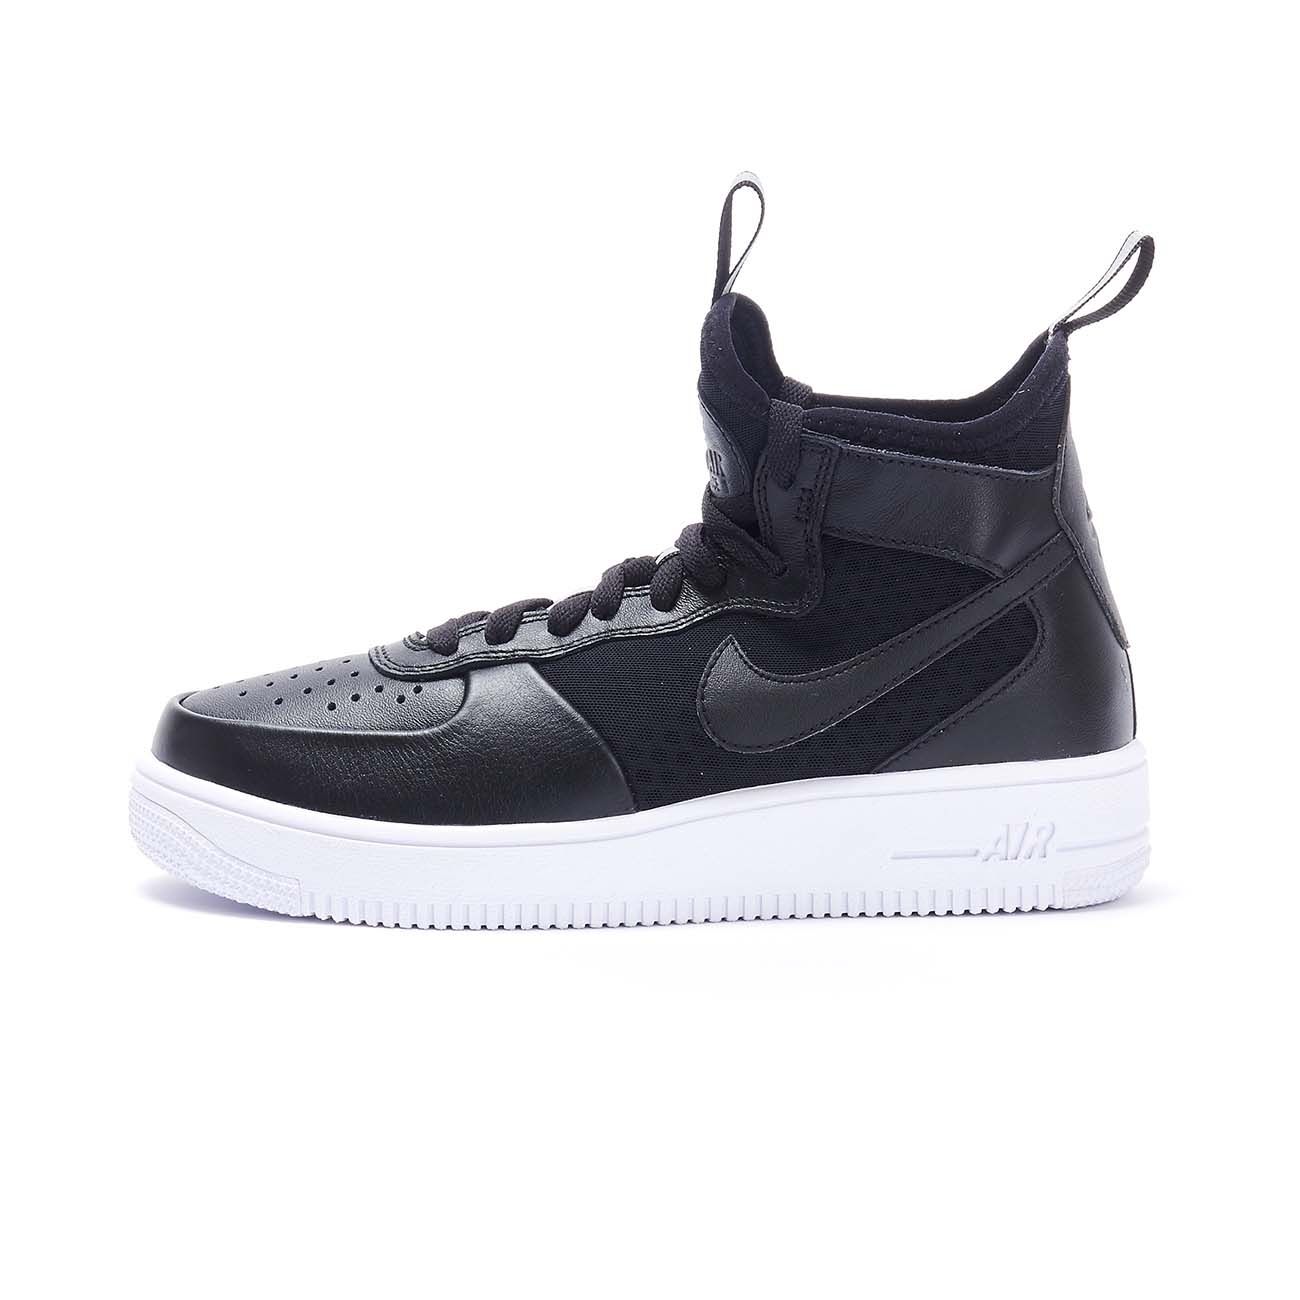 NIKE SNEAKERS AIR FORCE 1 ULTRA FORCE MID-TOP Uomo Black white ...